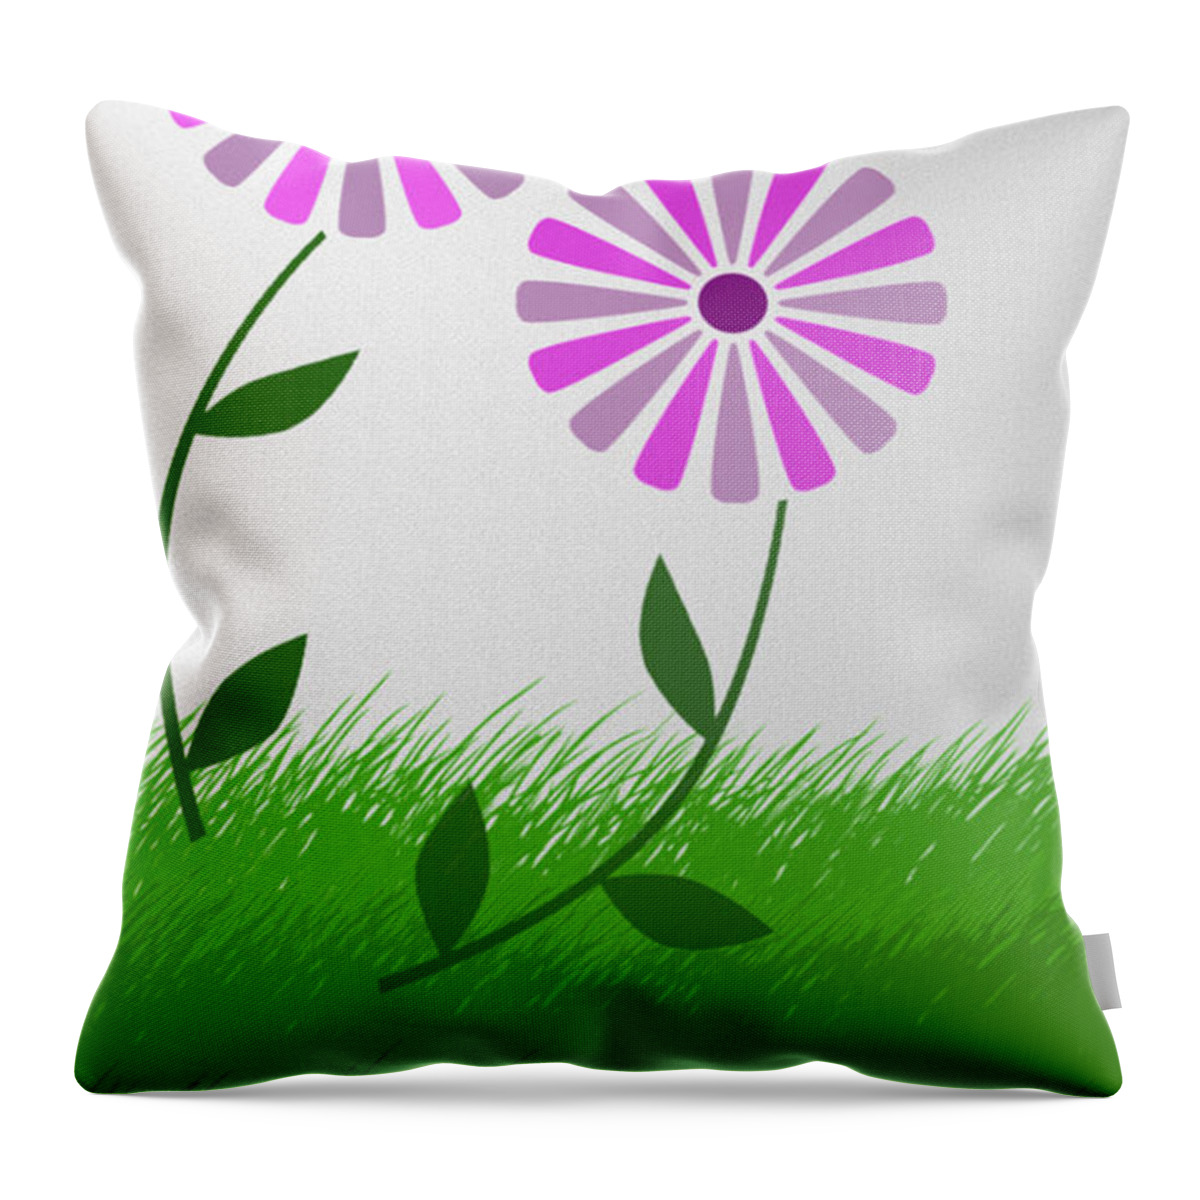 Andee Design Flowers Throw Pillow featuring the digital art The Flowers Run Free by Andee Design